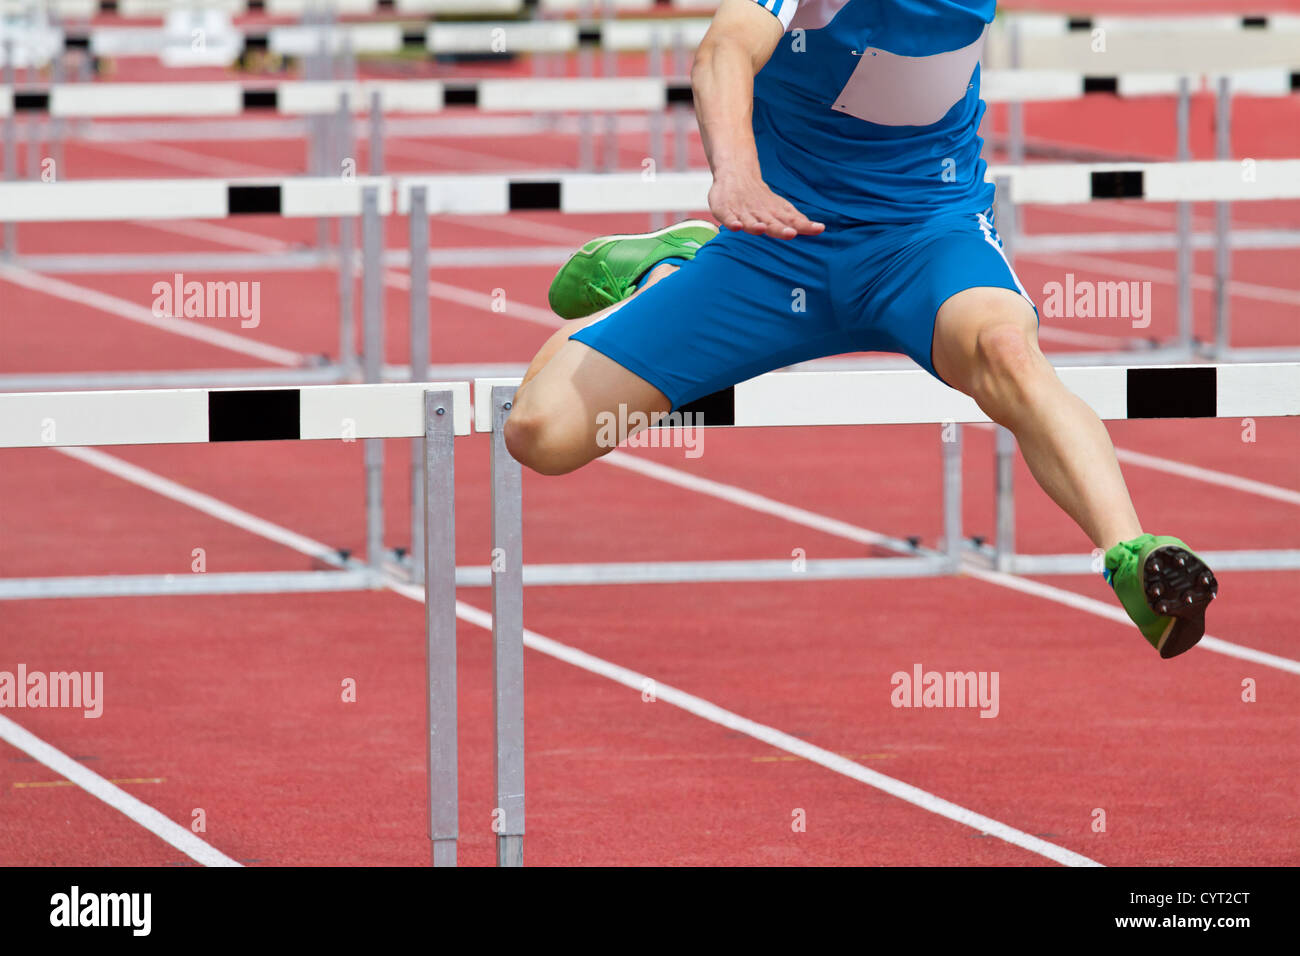 hurdle runner leaping over the hurdles Stock Photo